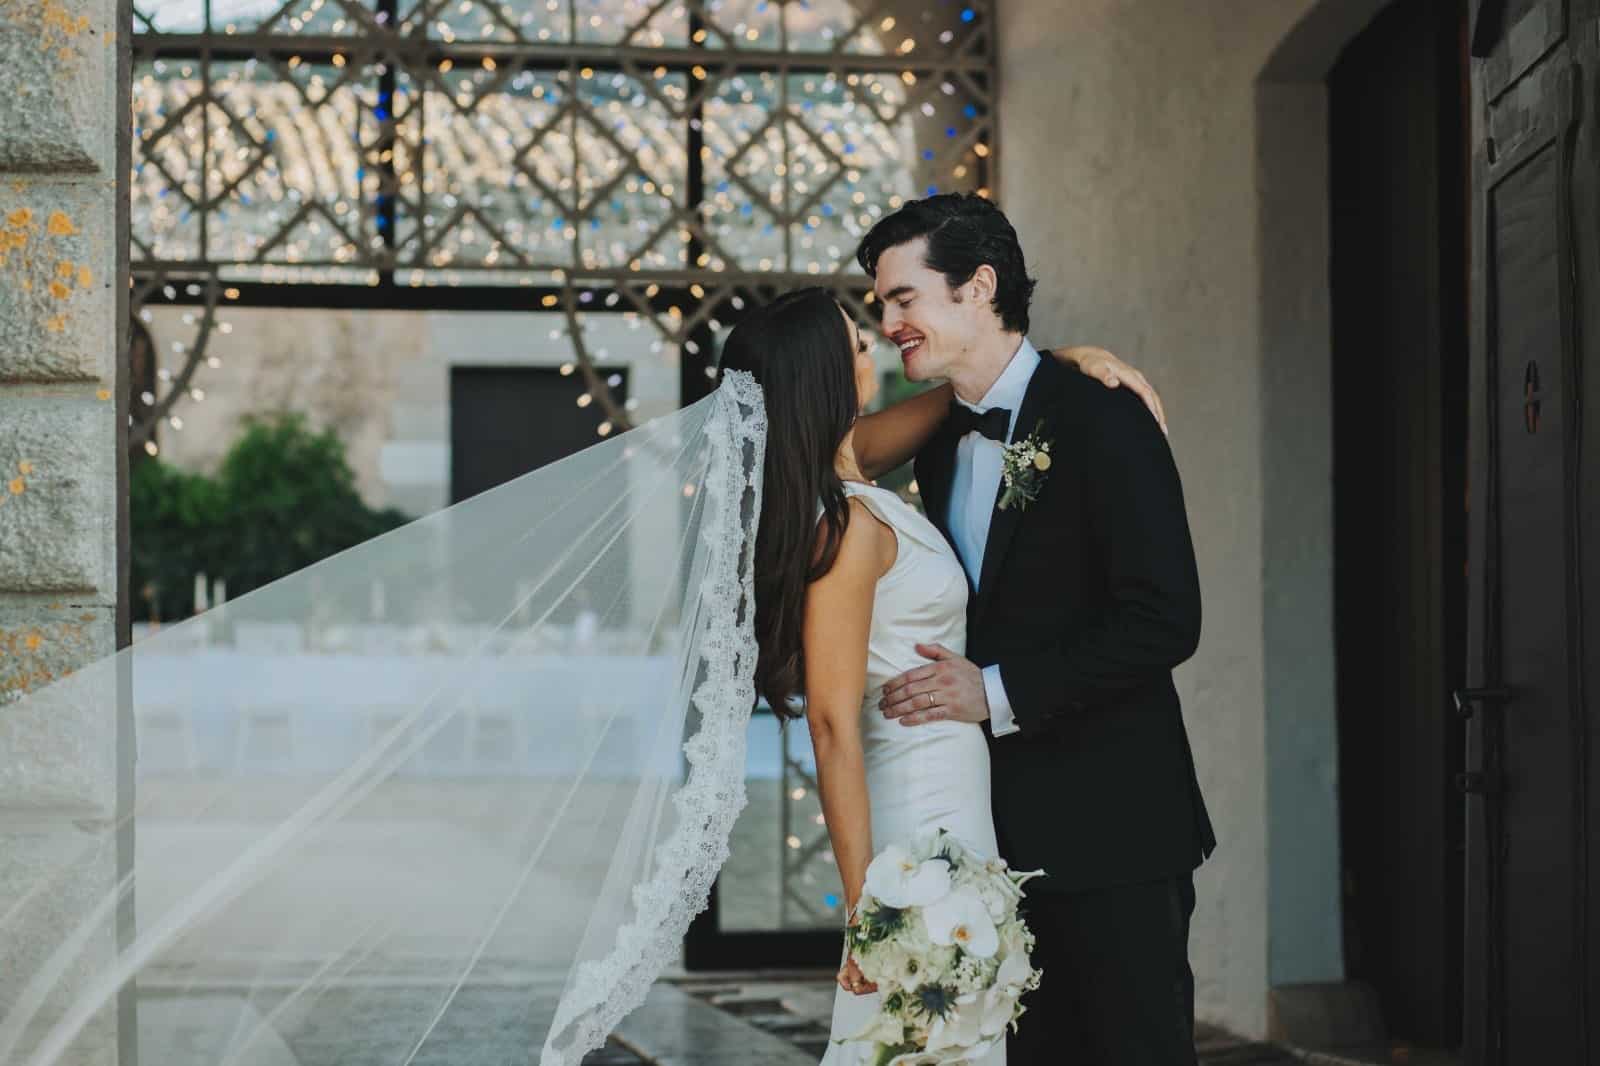 Spouses Ariana and Jack kiss each other at their sicilian wedding